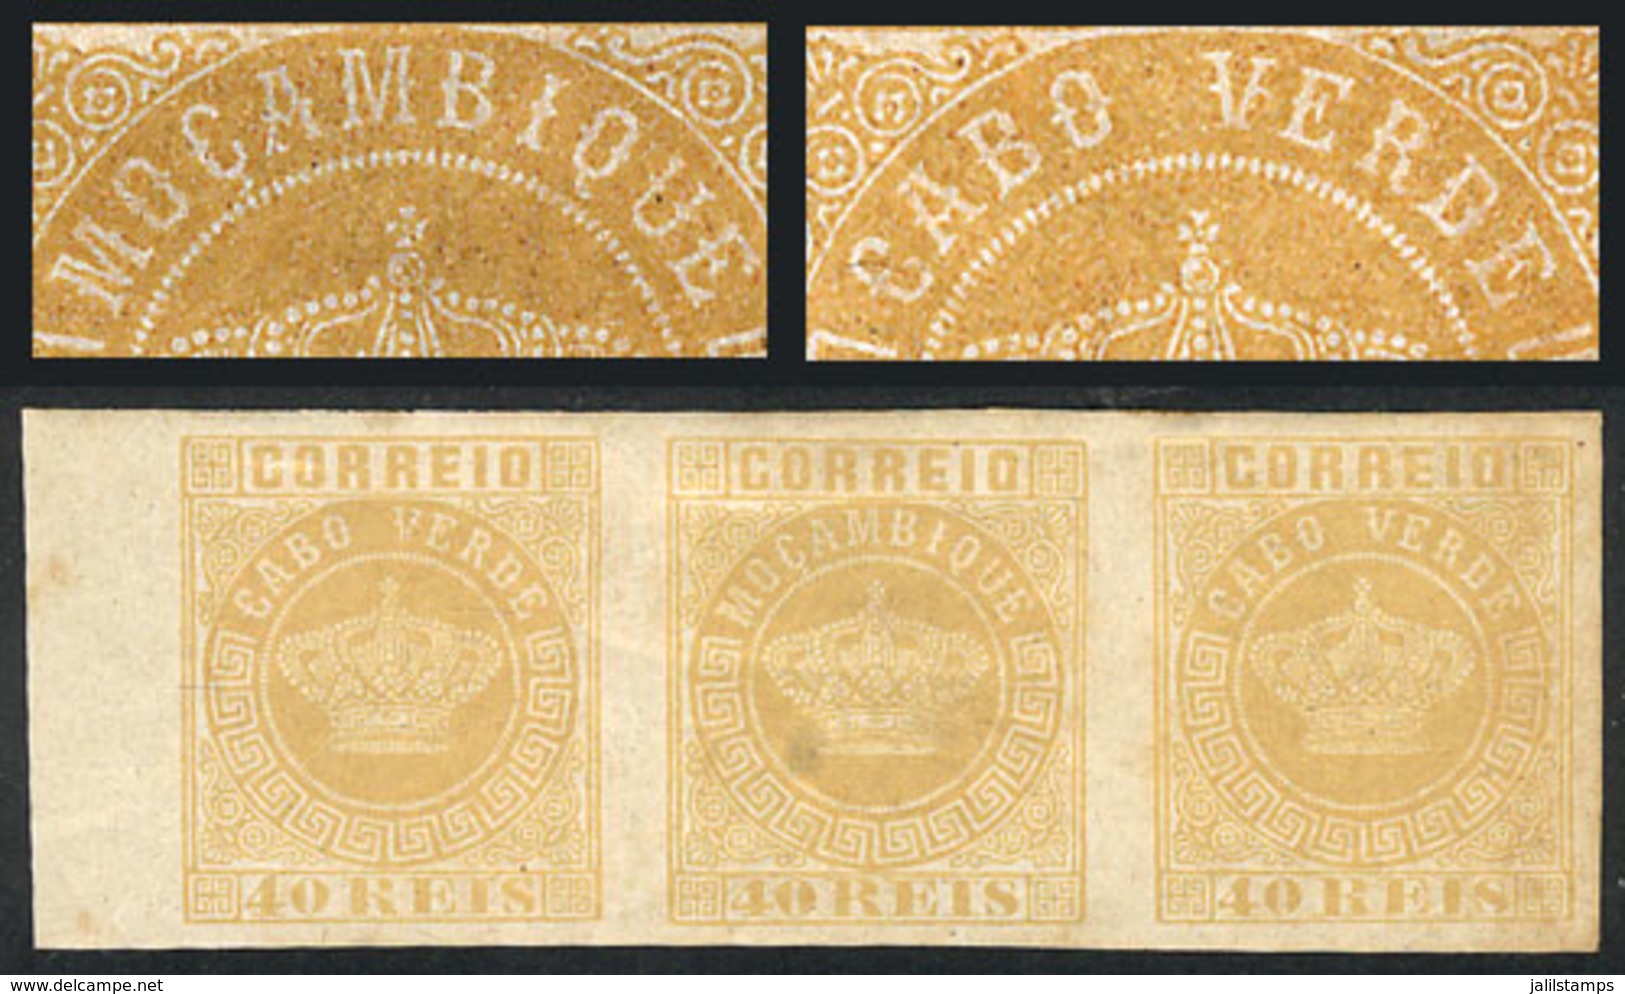 CAPE VERDE: Sc.13c, 1881/5 40r. Yellow, Imperforate Strip Of 3, The Middle Stamp Inscribed With "Mozambique" ERROR, Mint - Cape Verde